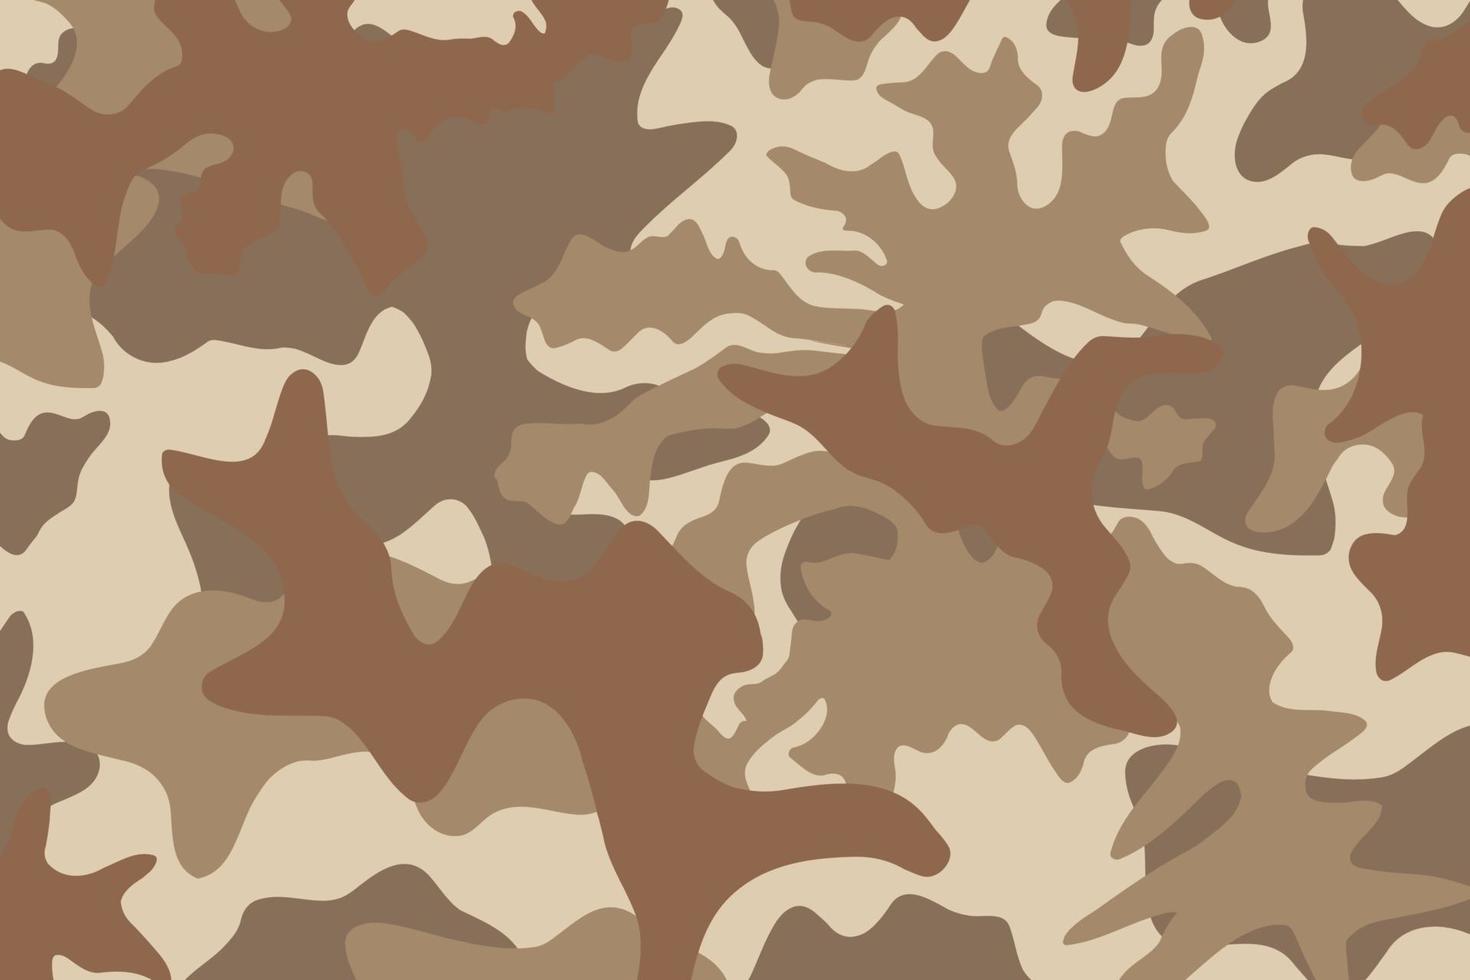 army stripes camouflage pattern brown desert sand battlefield military wide background vector